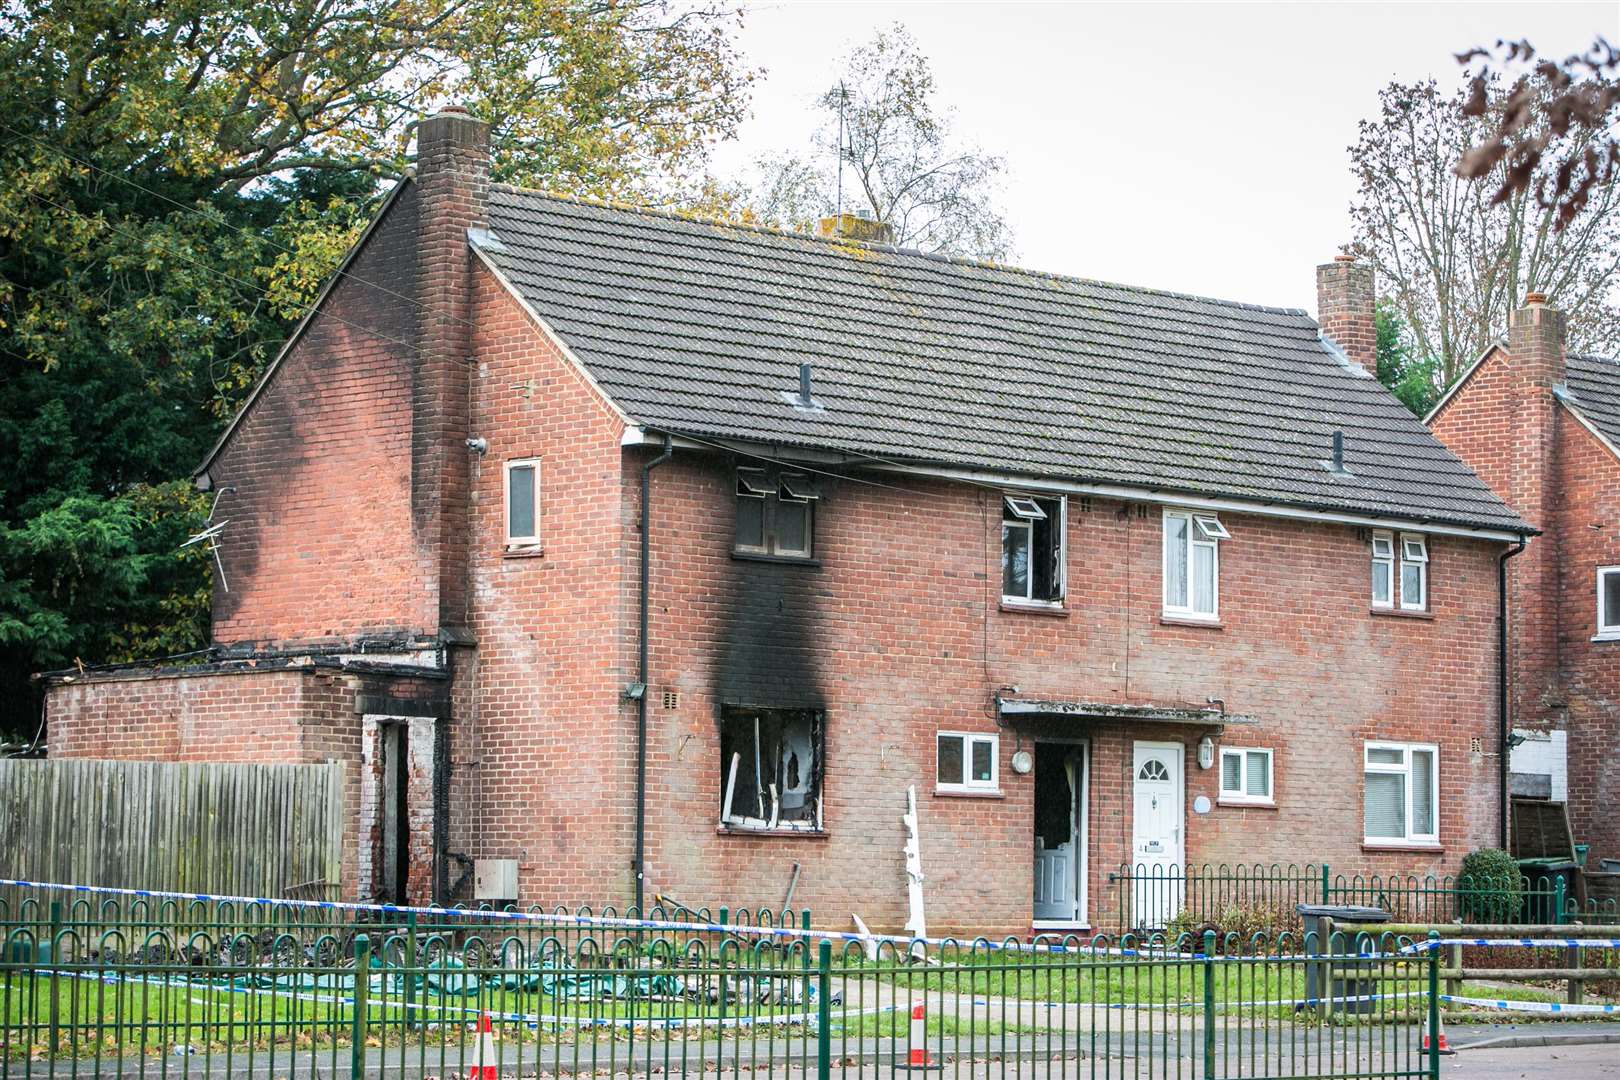 The burnt out home in Spitfire Road